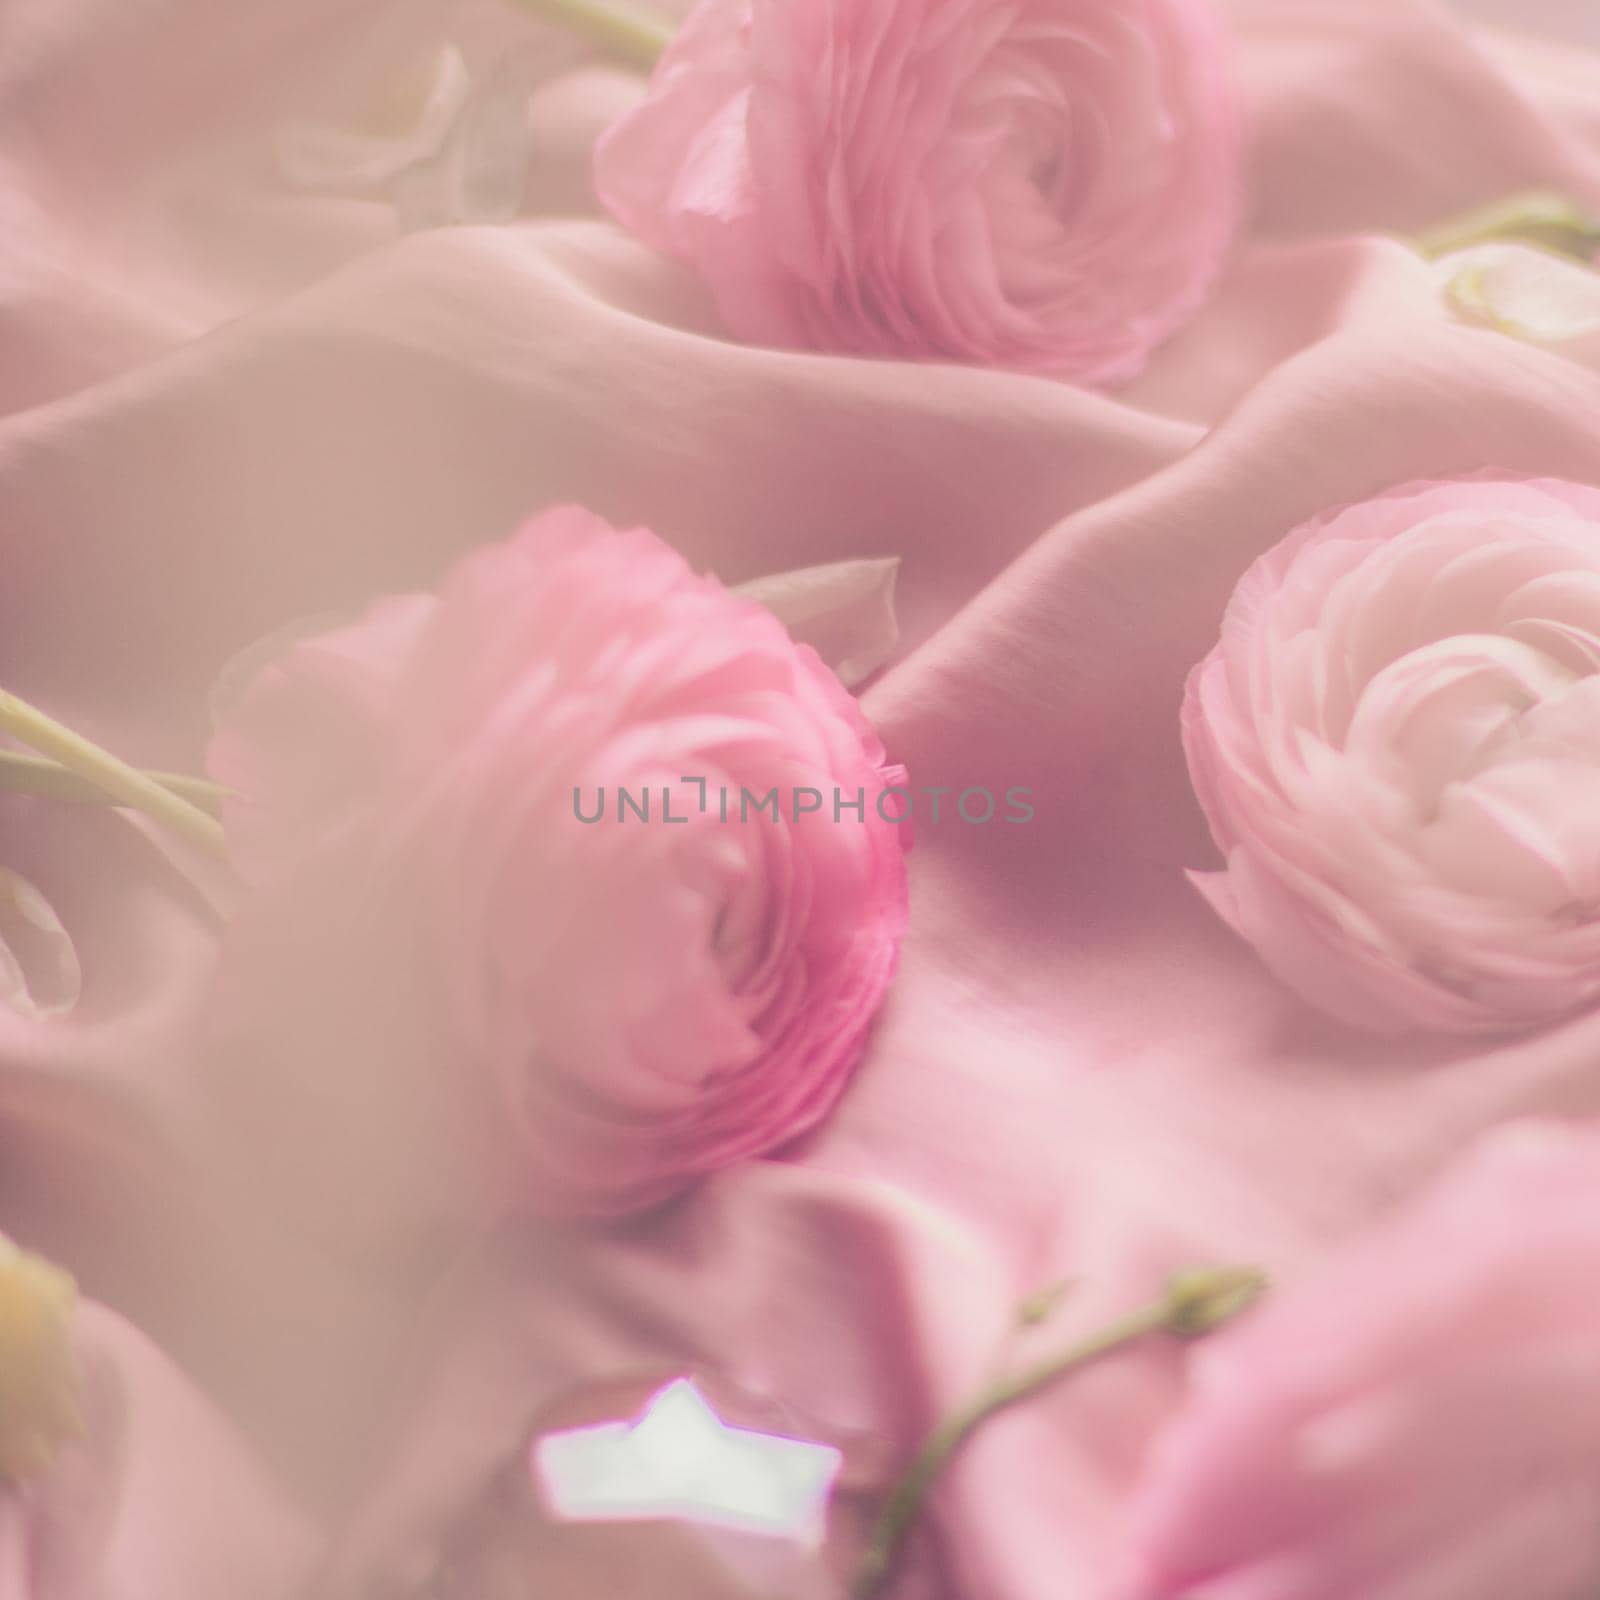 pink rose flowers on soft silk - wedding, holiday and floral background styled concept by Anneleven